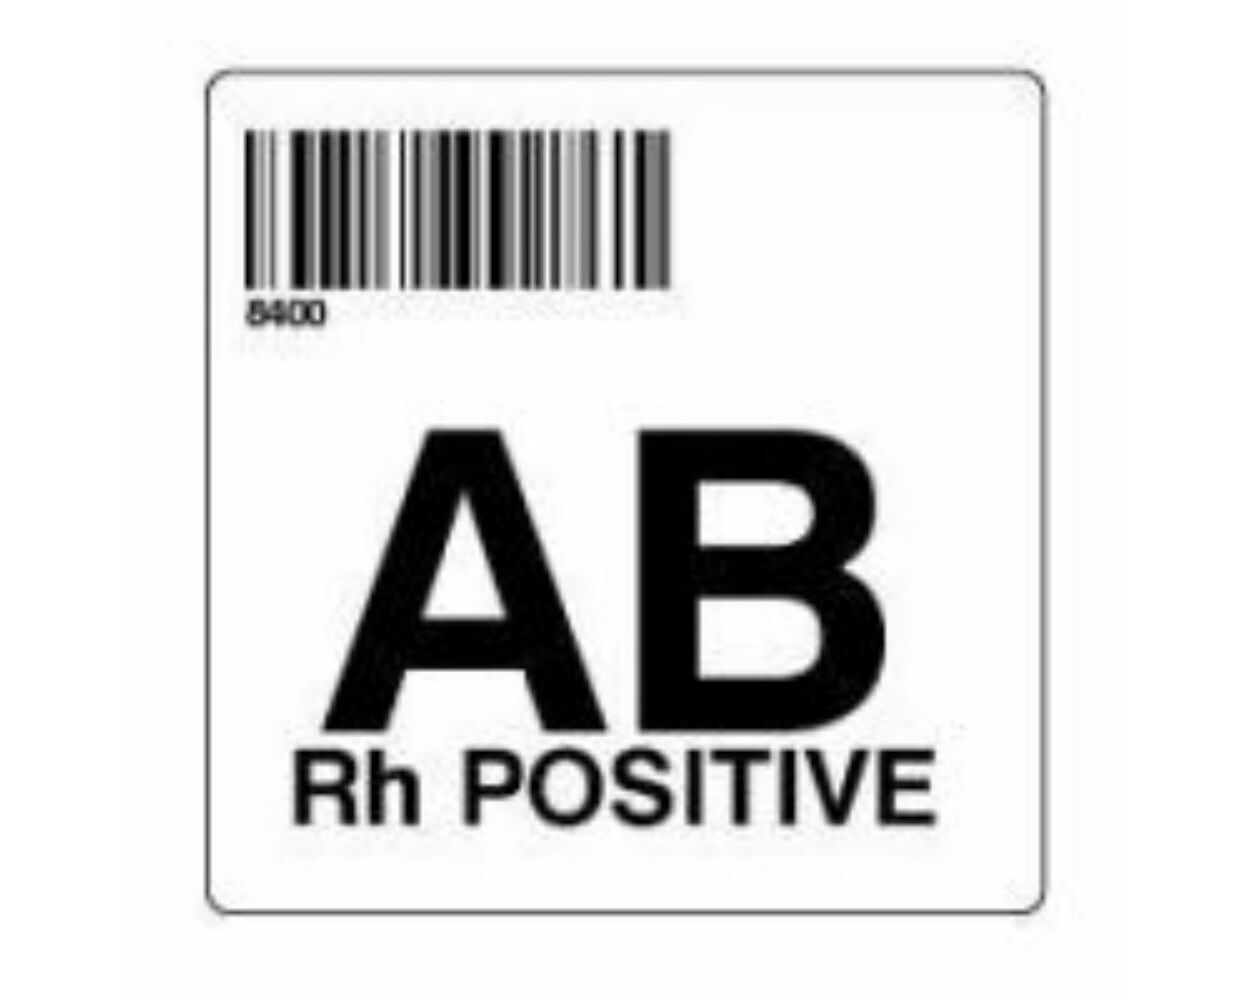 Blood Bank Labels Products, Supplies and Equipment